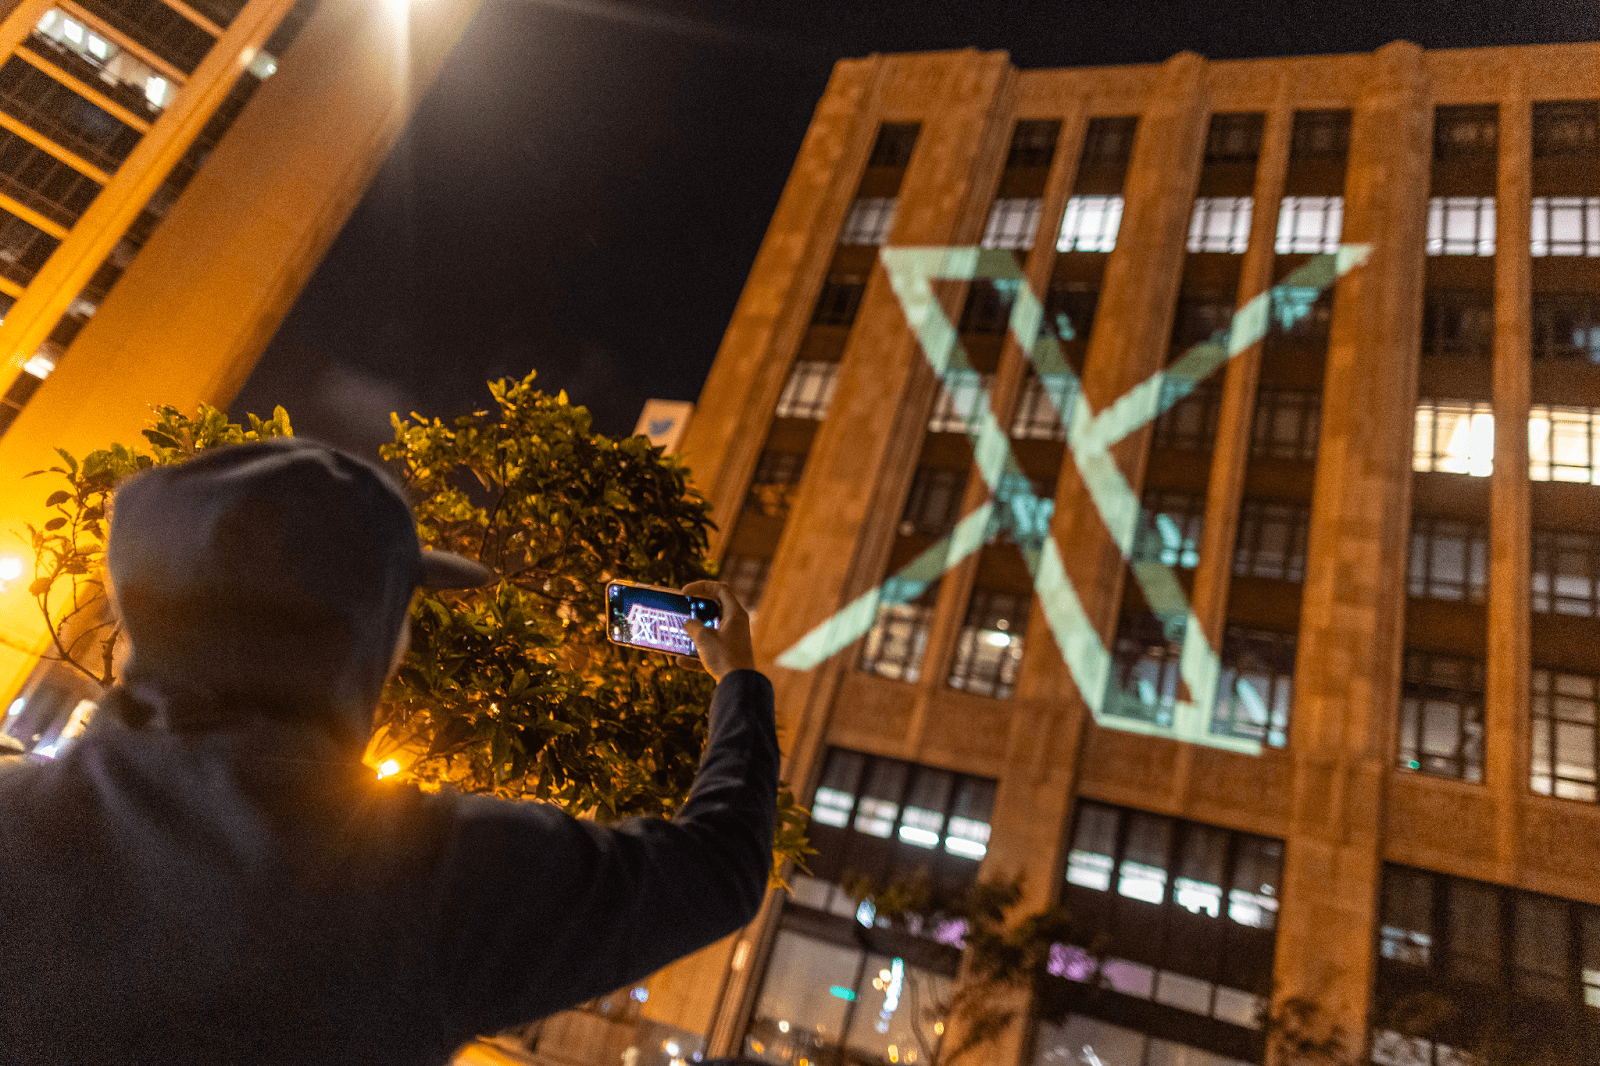 X logo projected on a building